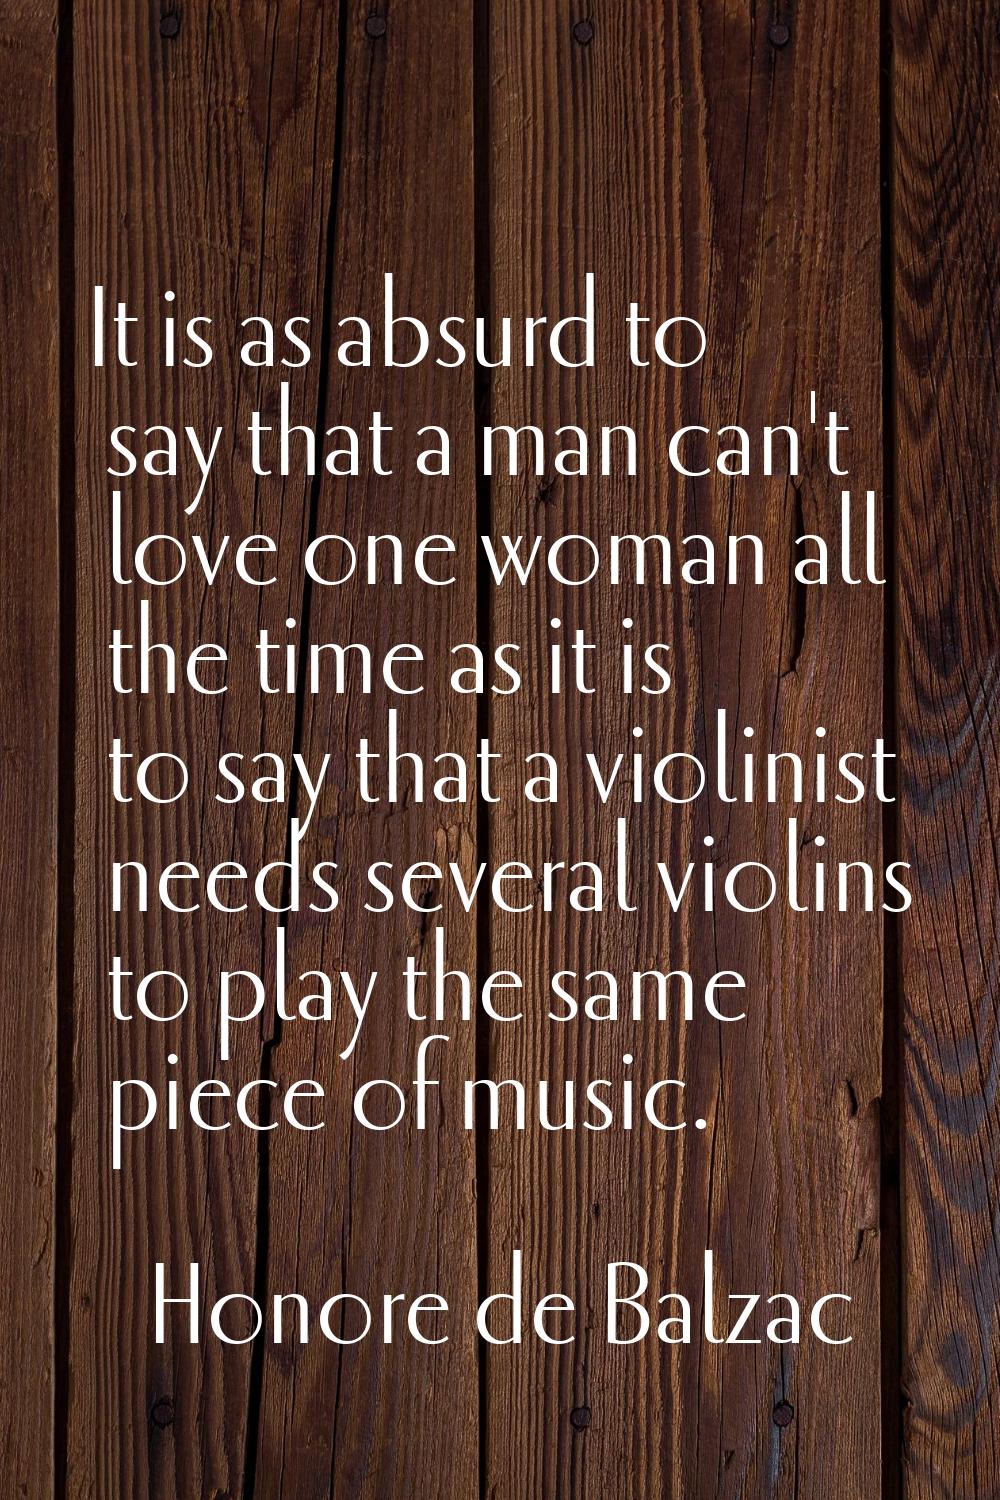 It is as absurd to say that a man can't love one woman all the time as it is to say that a violinis